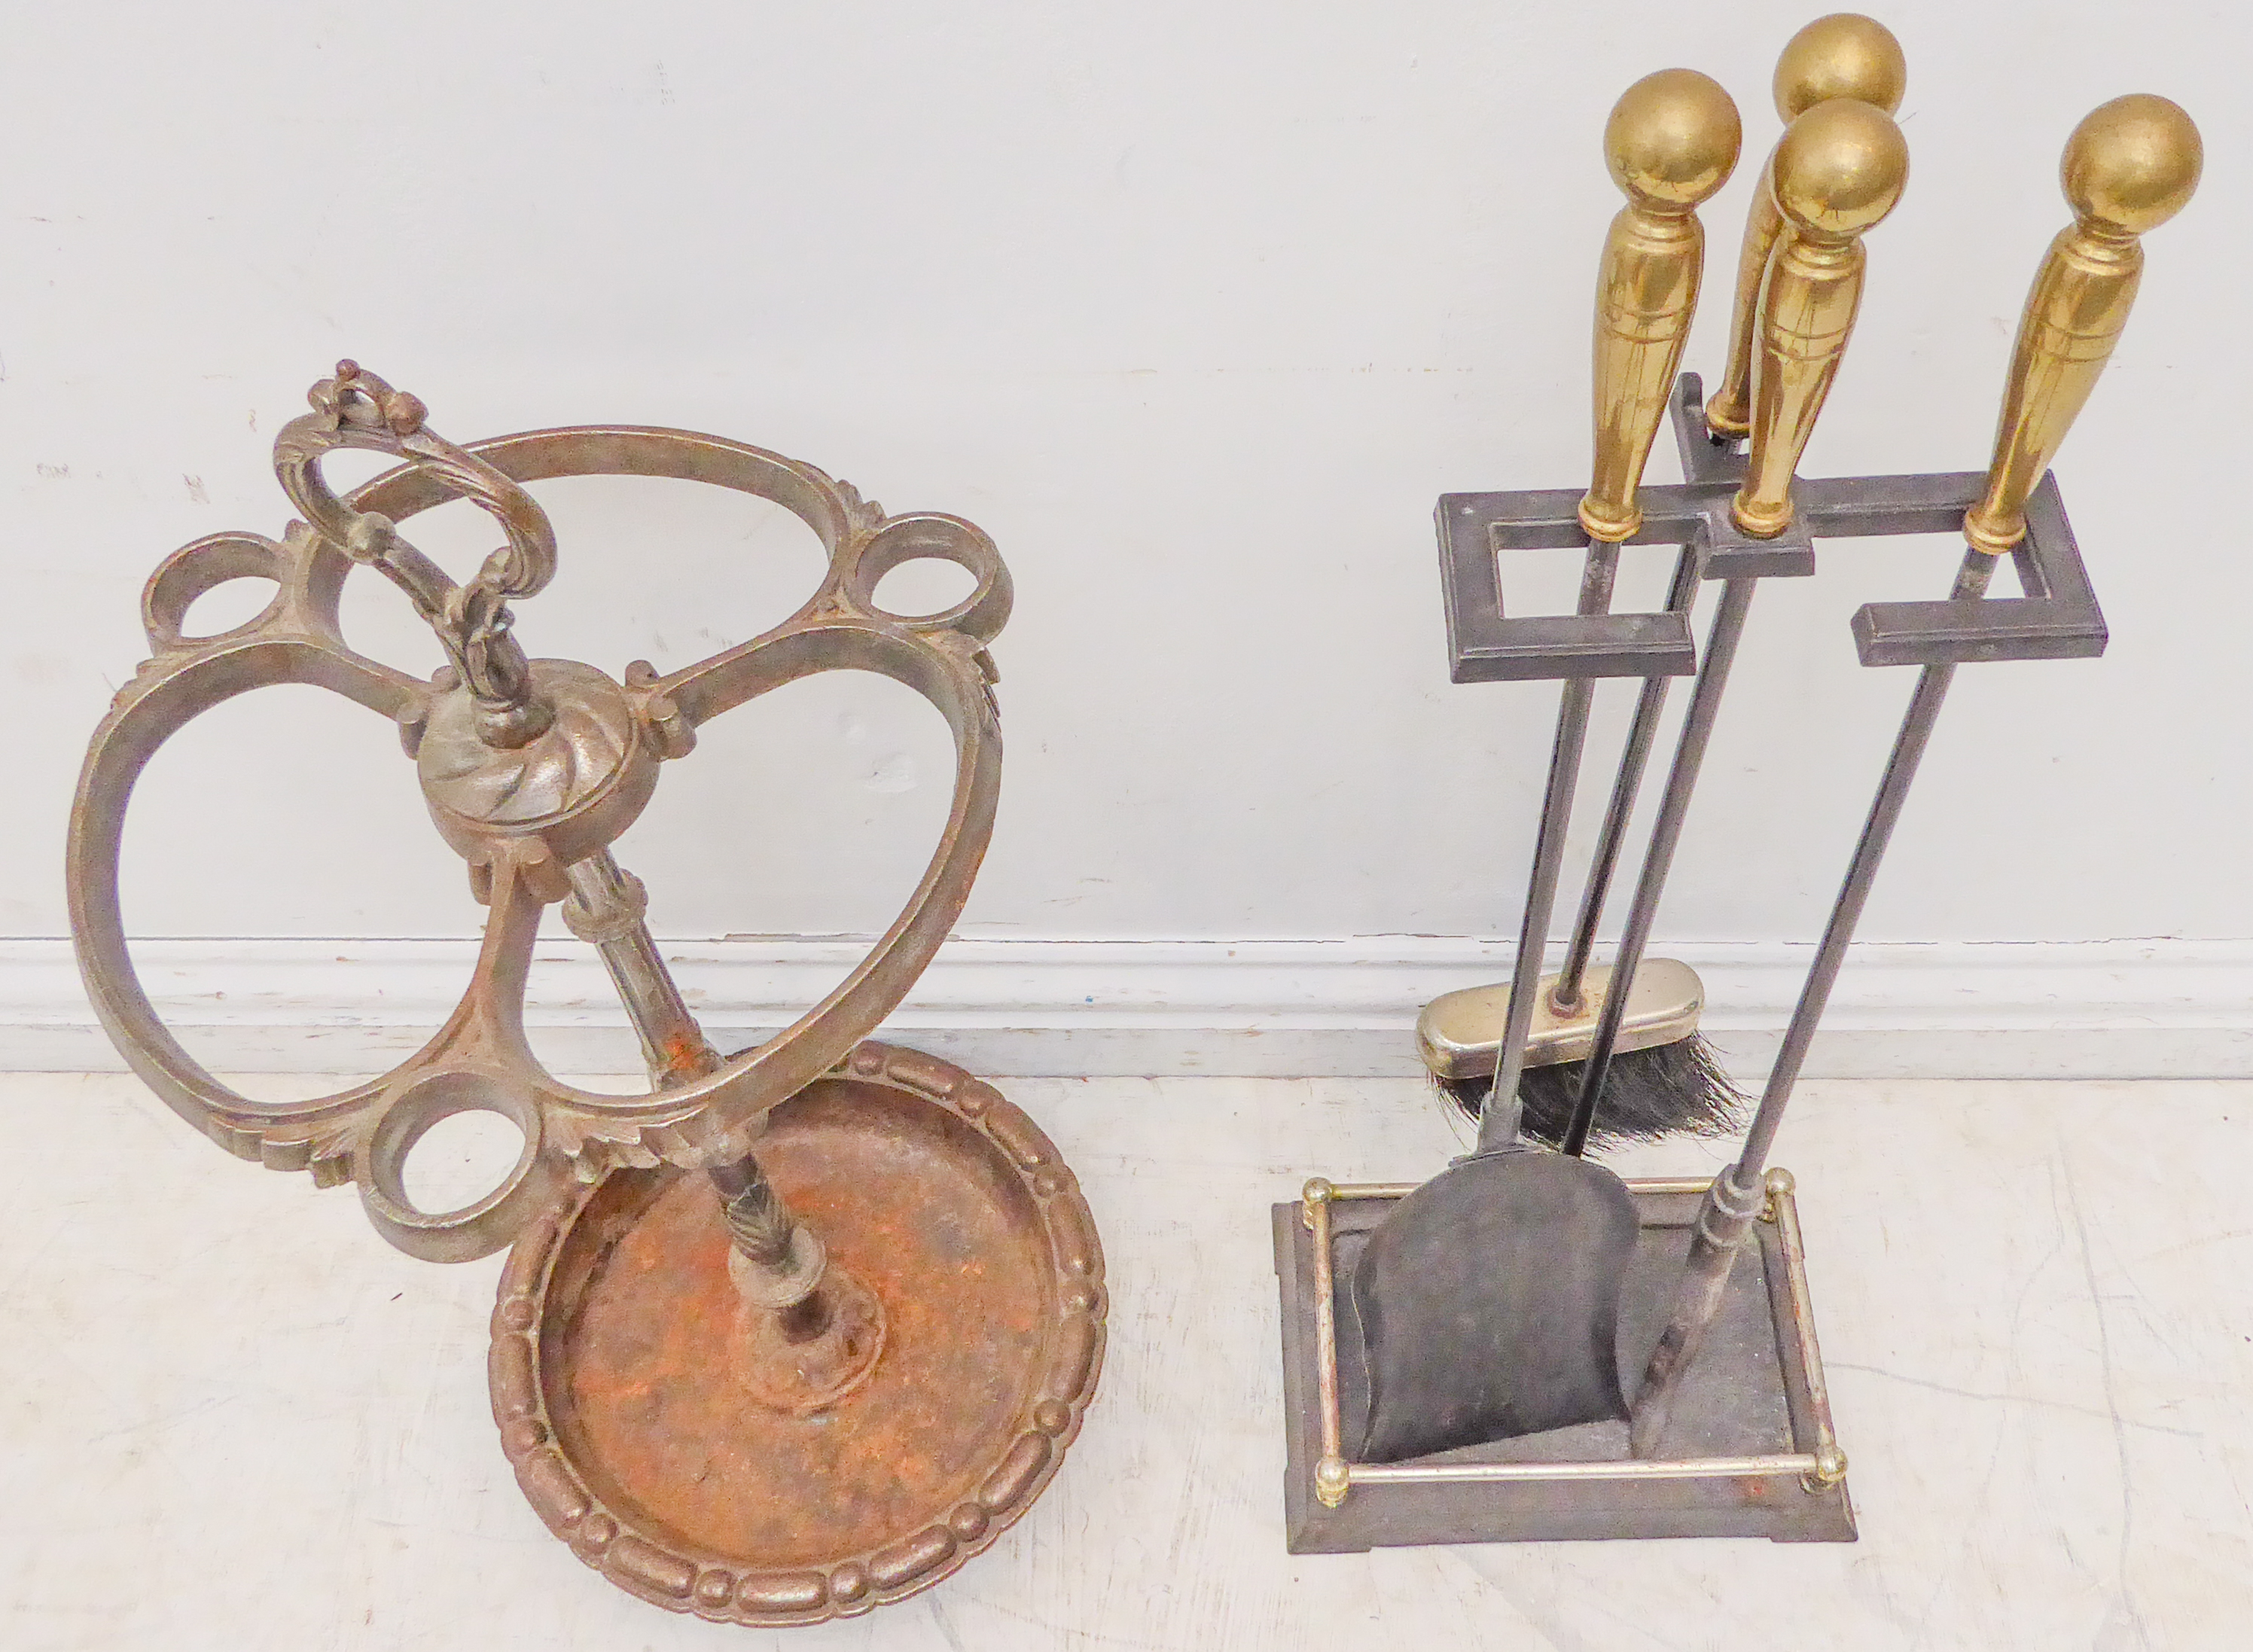 A four-piece iron and brass-handled fire-iron set, together with a sectional iron umbrella and stick - Image 2 of 2